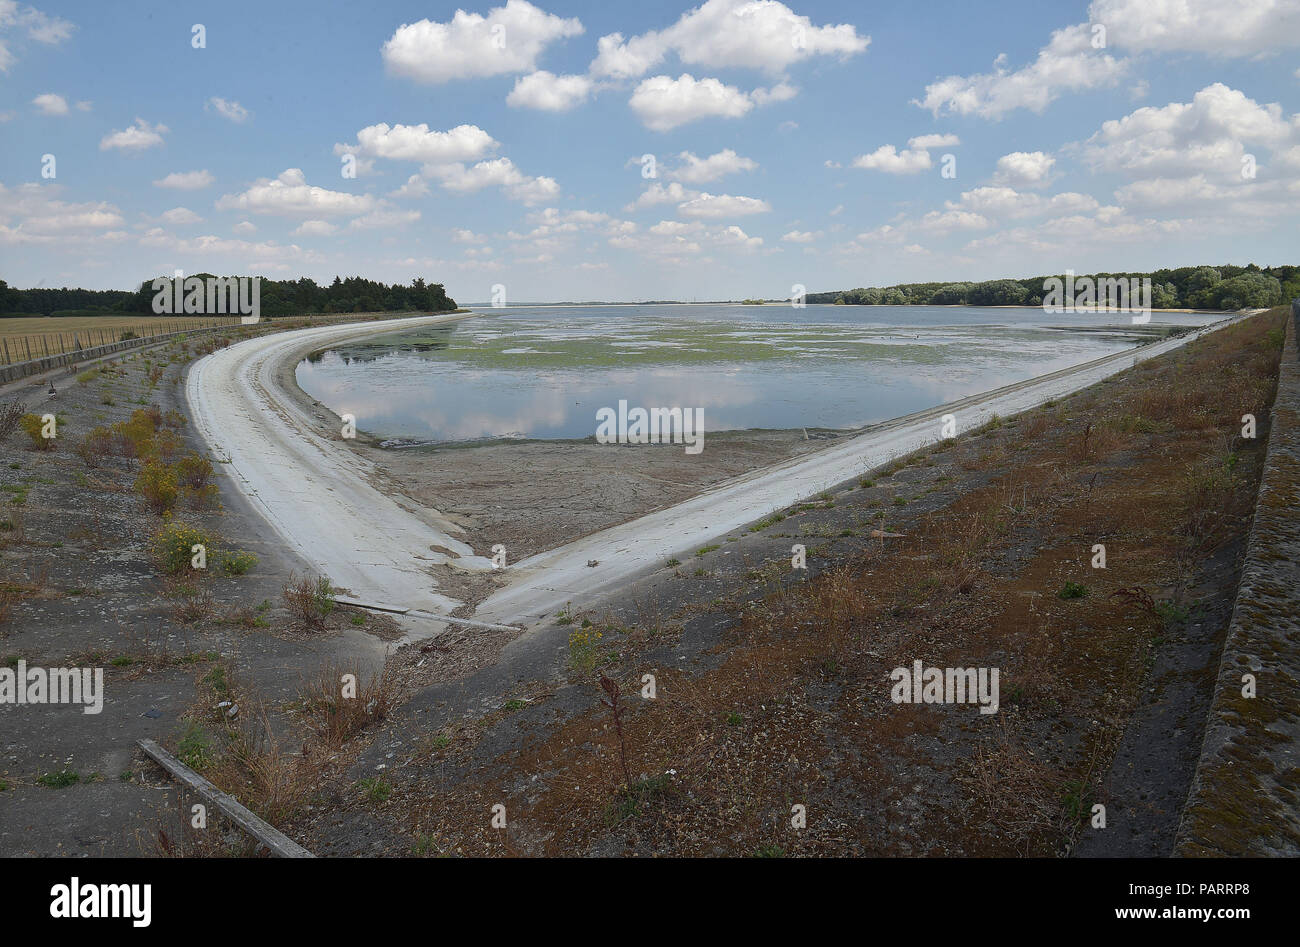 Very low water levels, which normally sits on the weeded banks, at Hanningfield reservoir, near Chelmsford in Essex, as the hot weather continues across the country. Stock Photo